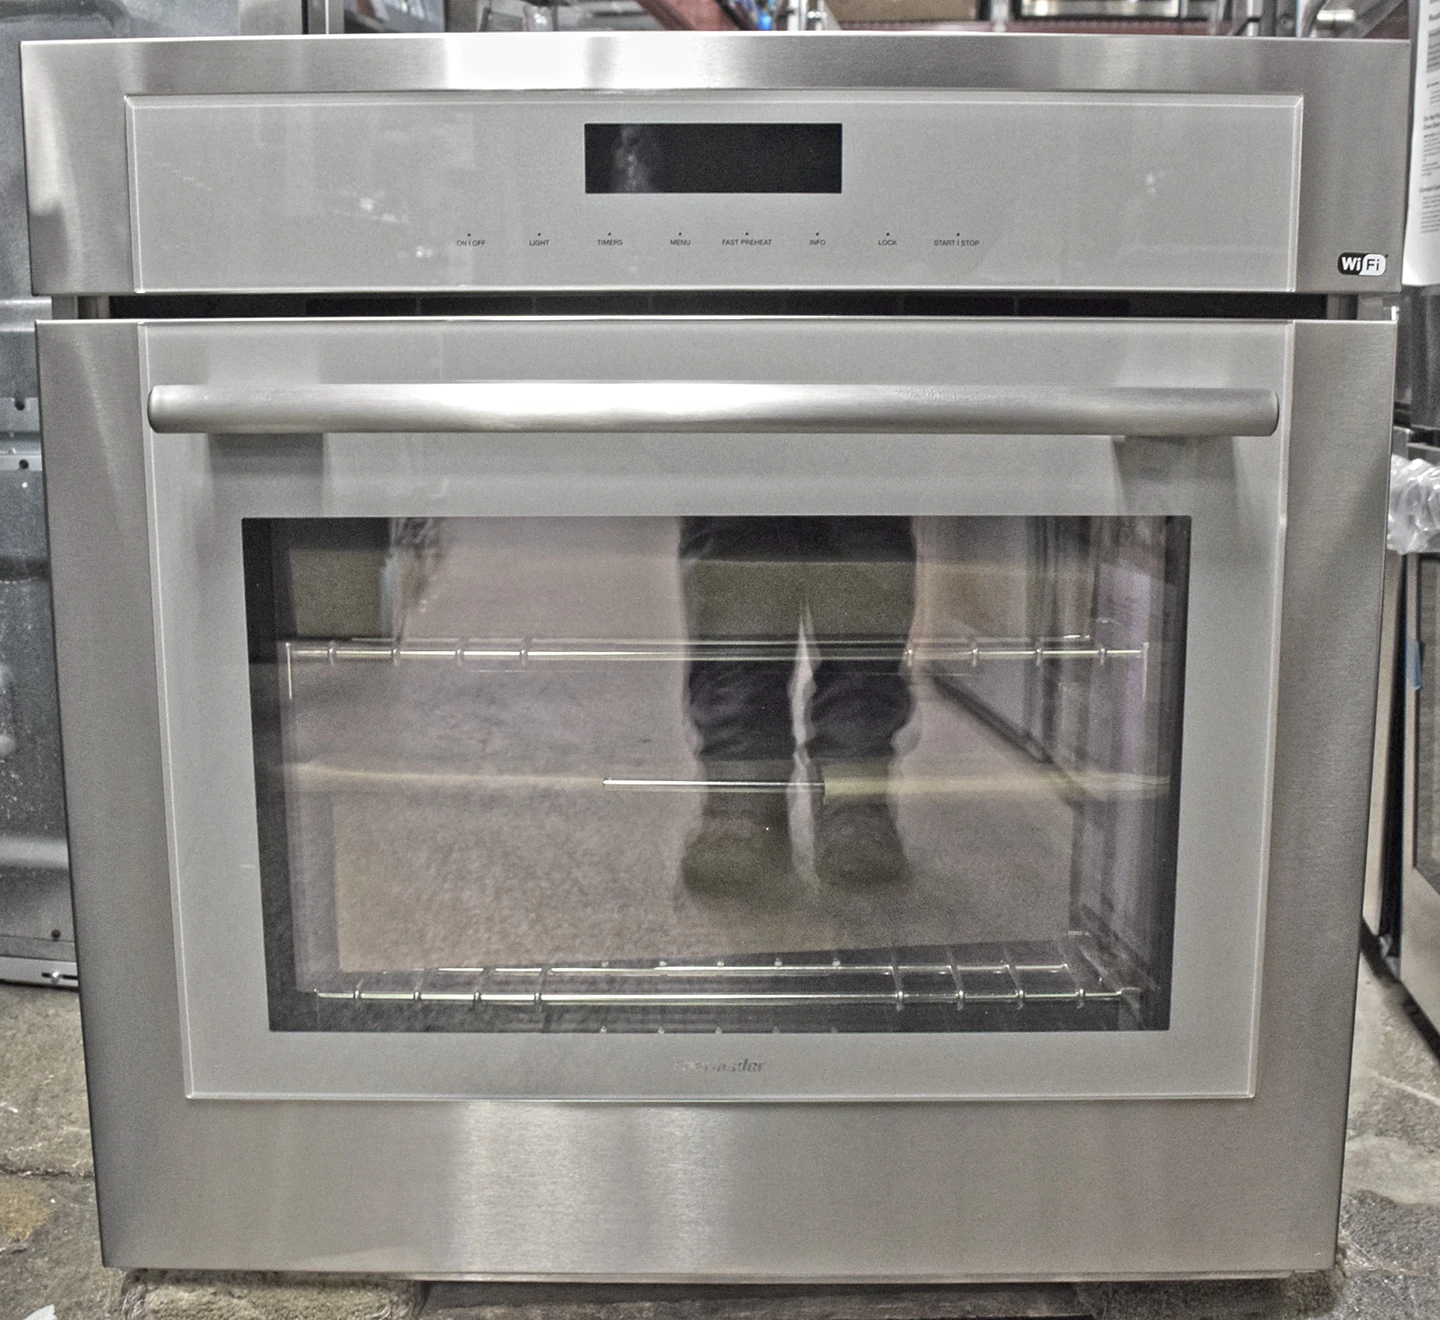 Gaggenau 400 Series BO451612 24 Smart Electric Wall Oven with